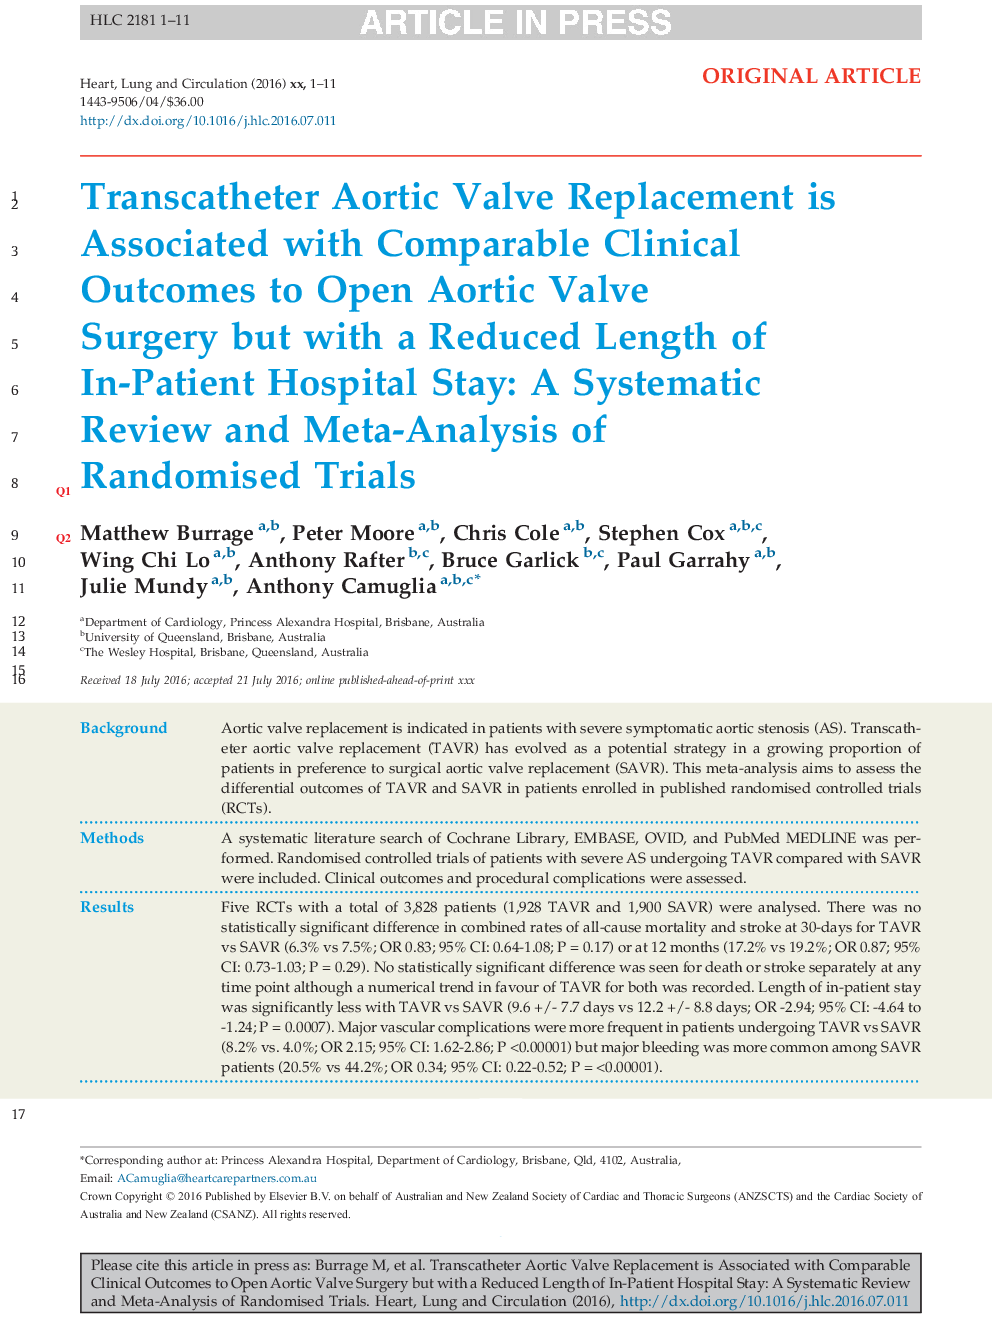 Transcatheter Aortic Valve Replacement is Associated with Comparable Clinical Outcomes to Open Aortic Valve Surgery but with a Reduced Length of In-Patient Hospital Stay: A Systematic Review and Meta-Analysis of Randomised Trials